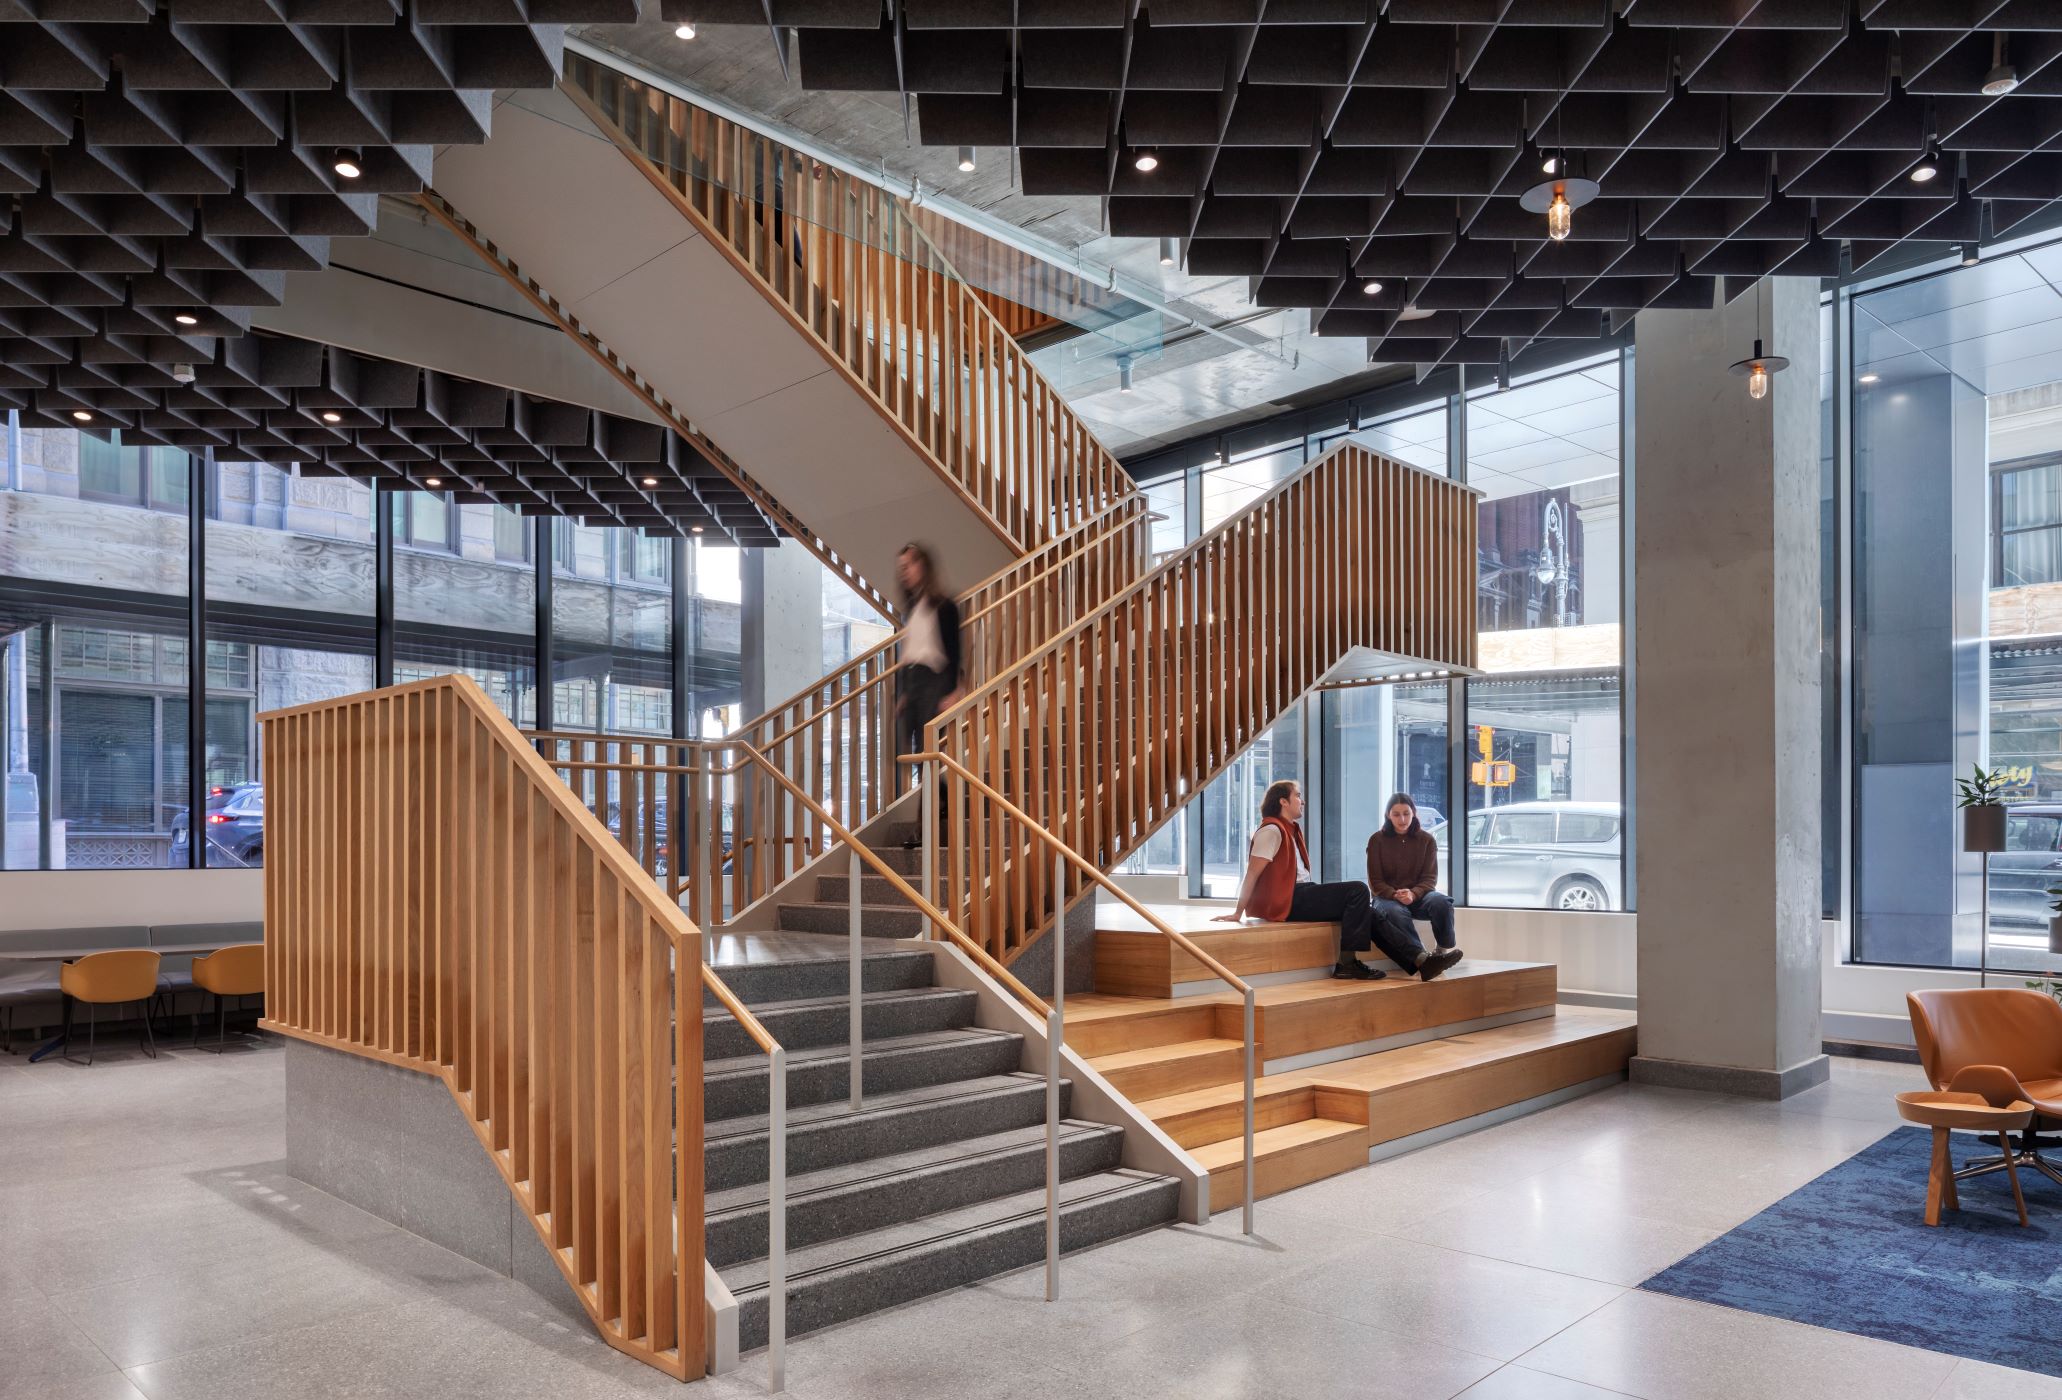 large staircase with timber battons and students casually sitting